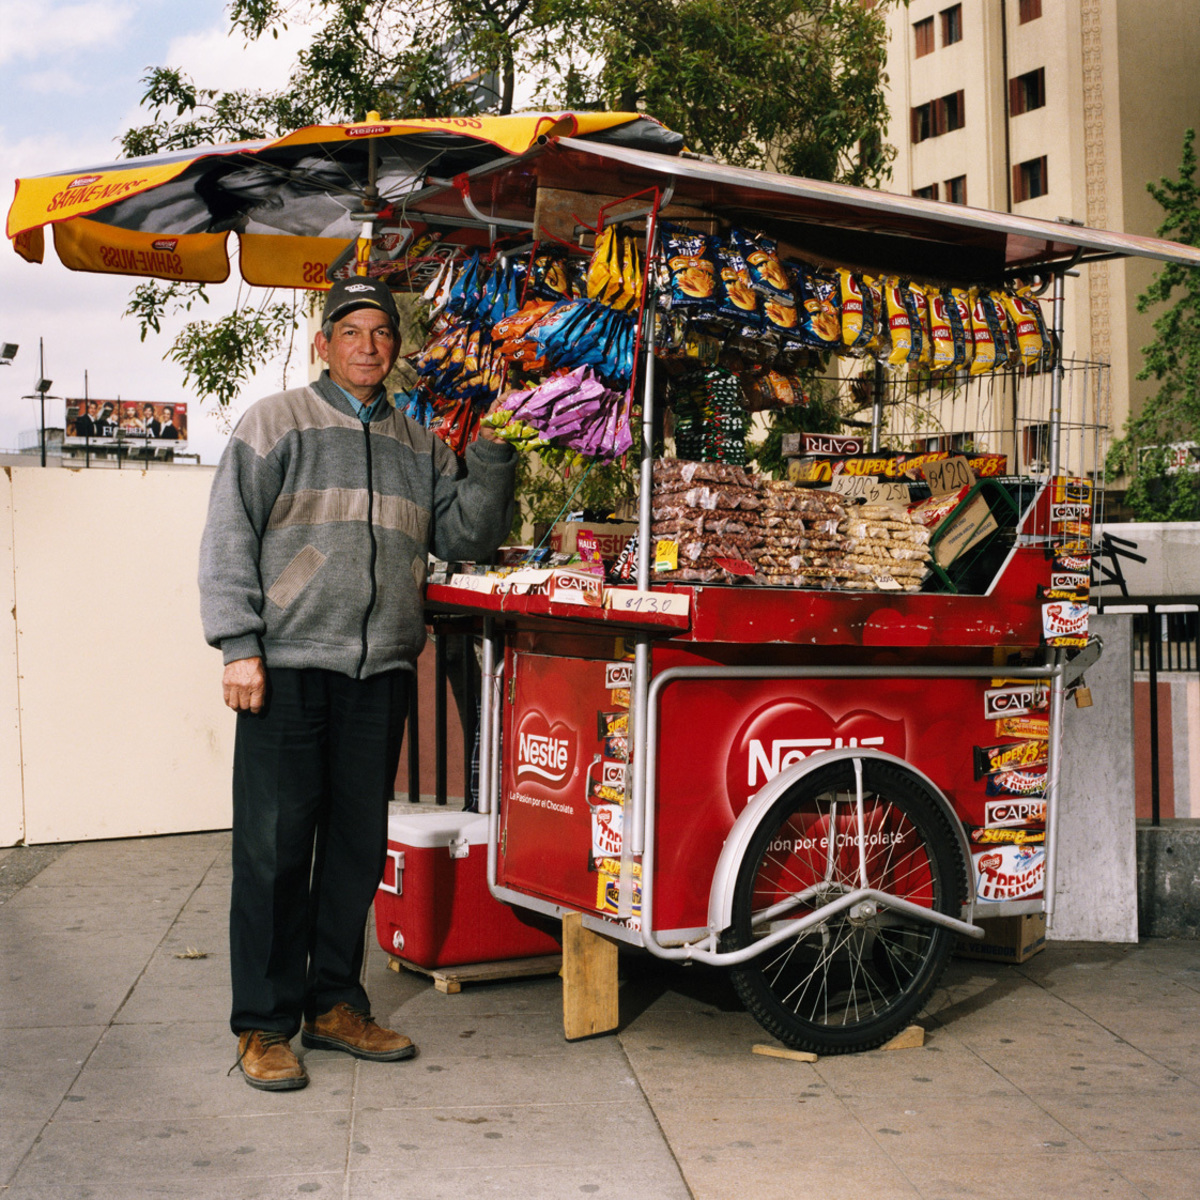 Snack stand, Santiago, Chile